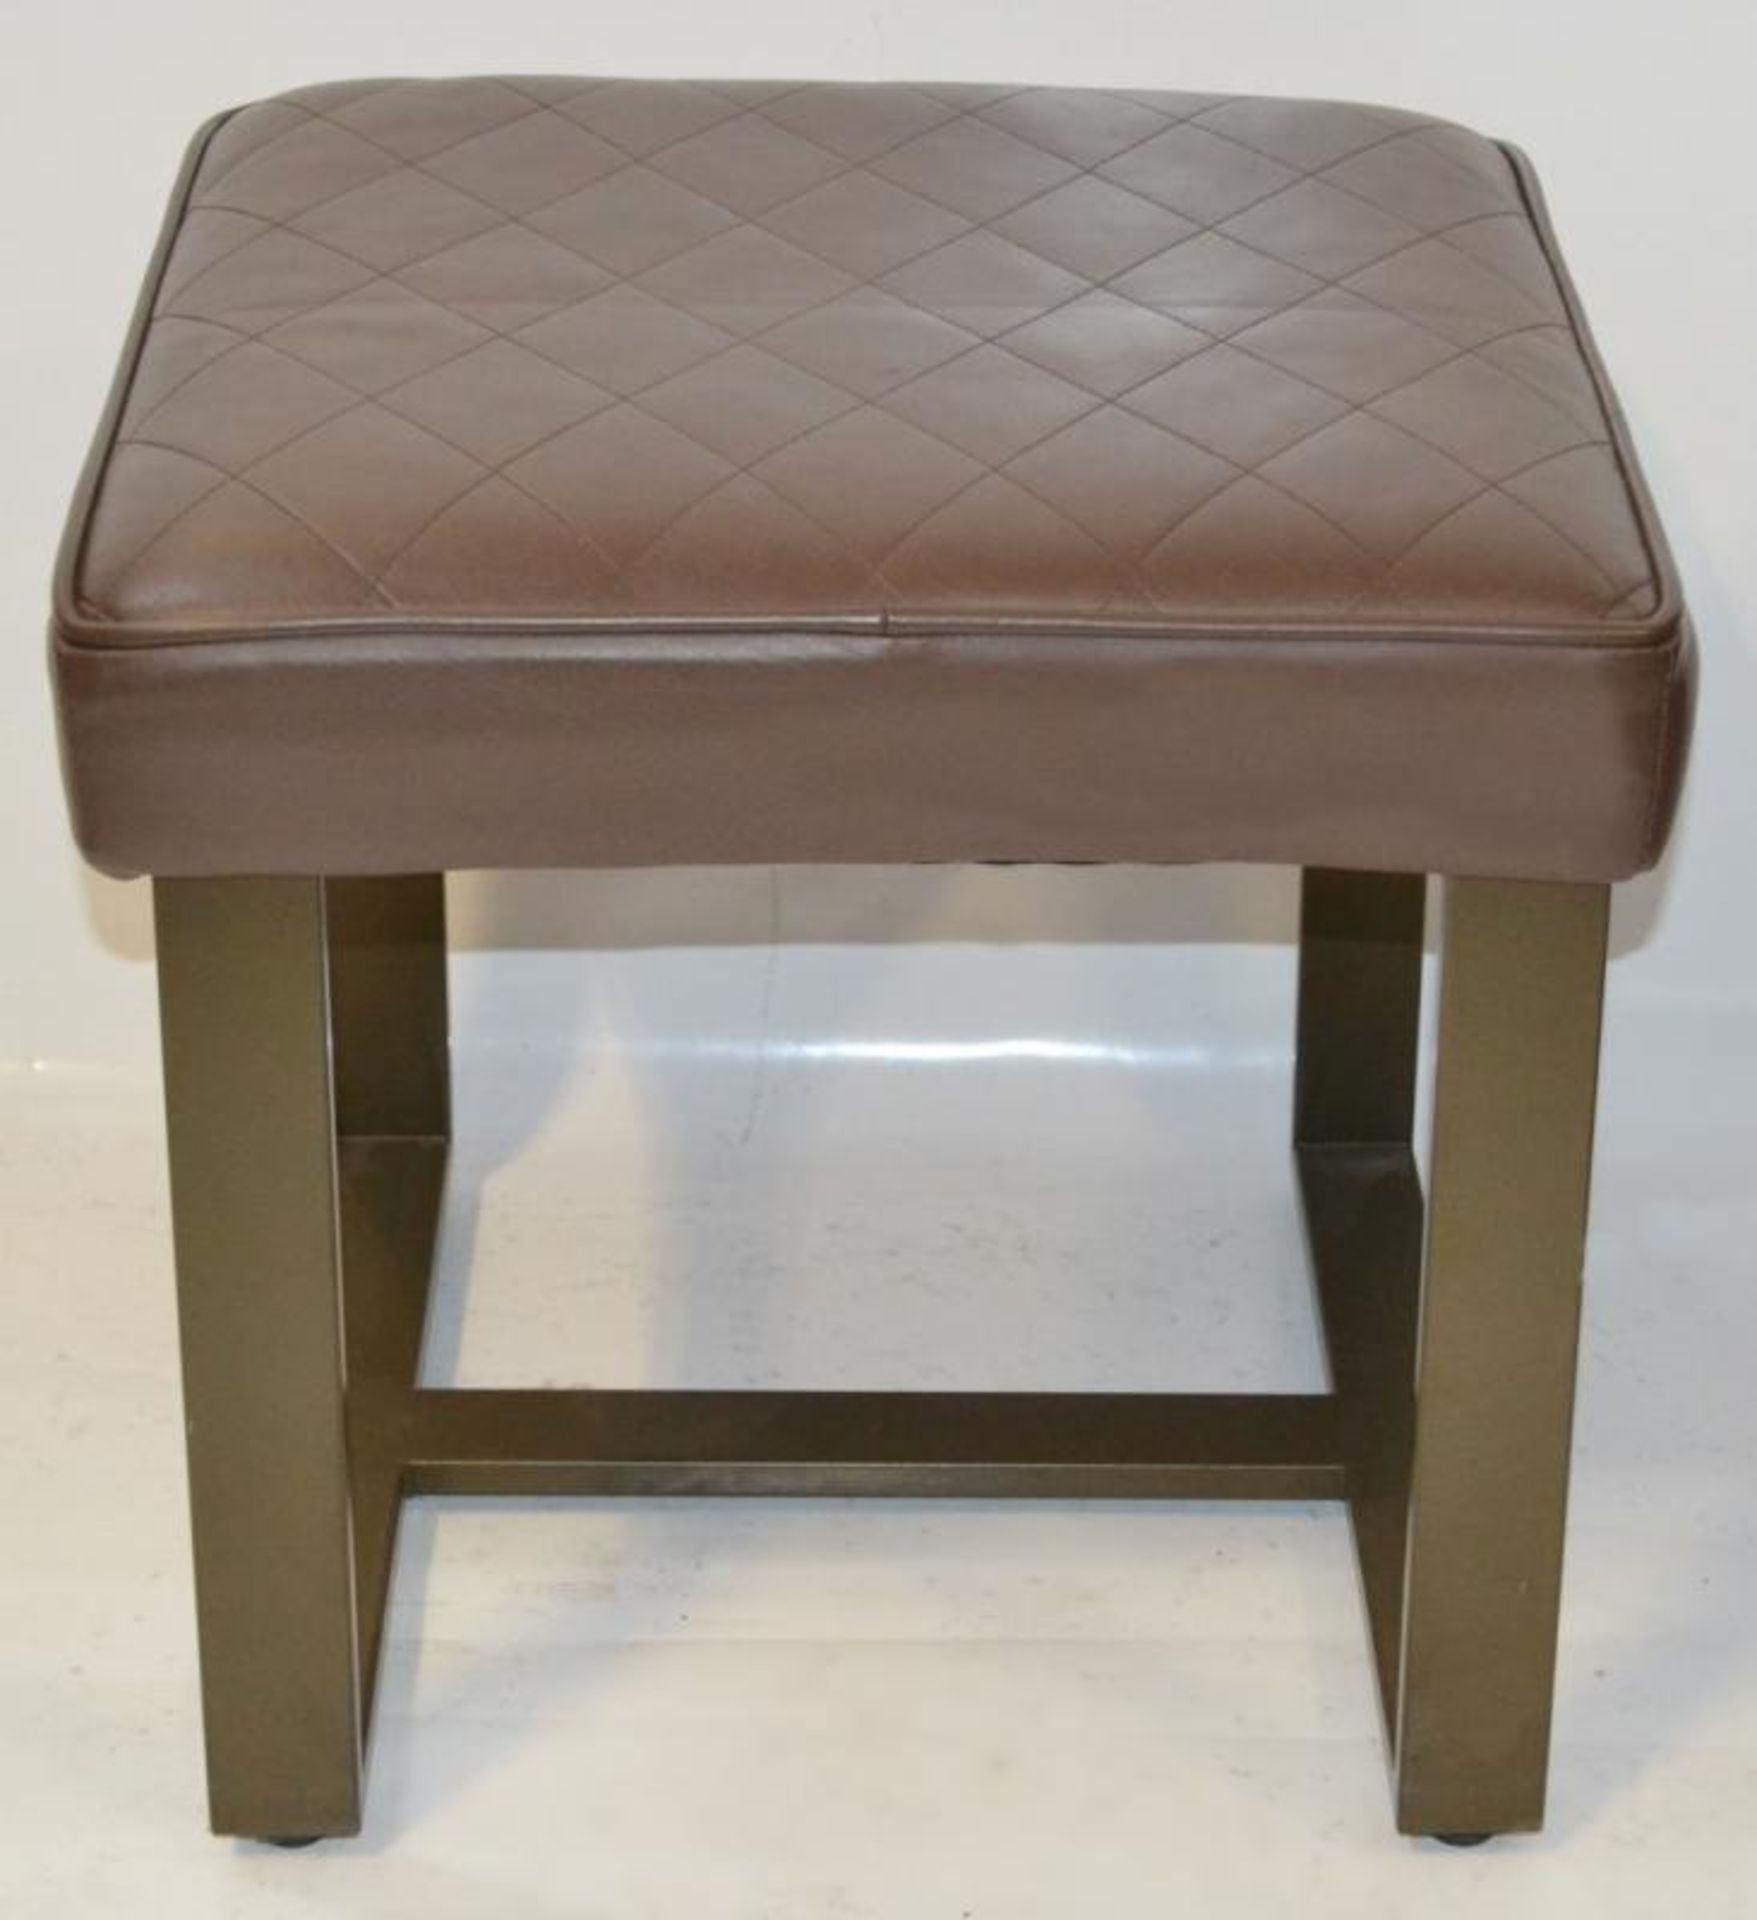 4 x Upholstered Stools In A Brown Faux Leather - Recently Removed From A Major UK Store In Very Goo - Image 2 of 5